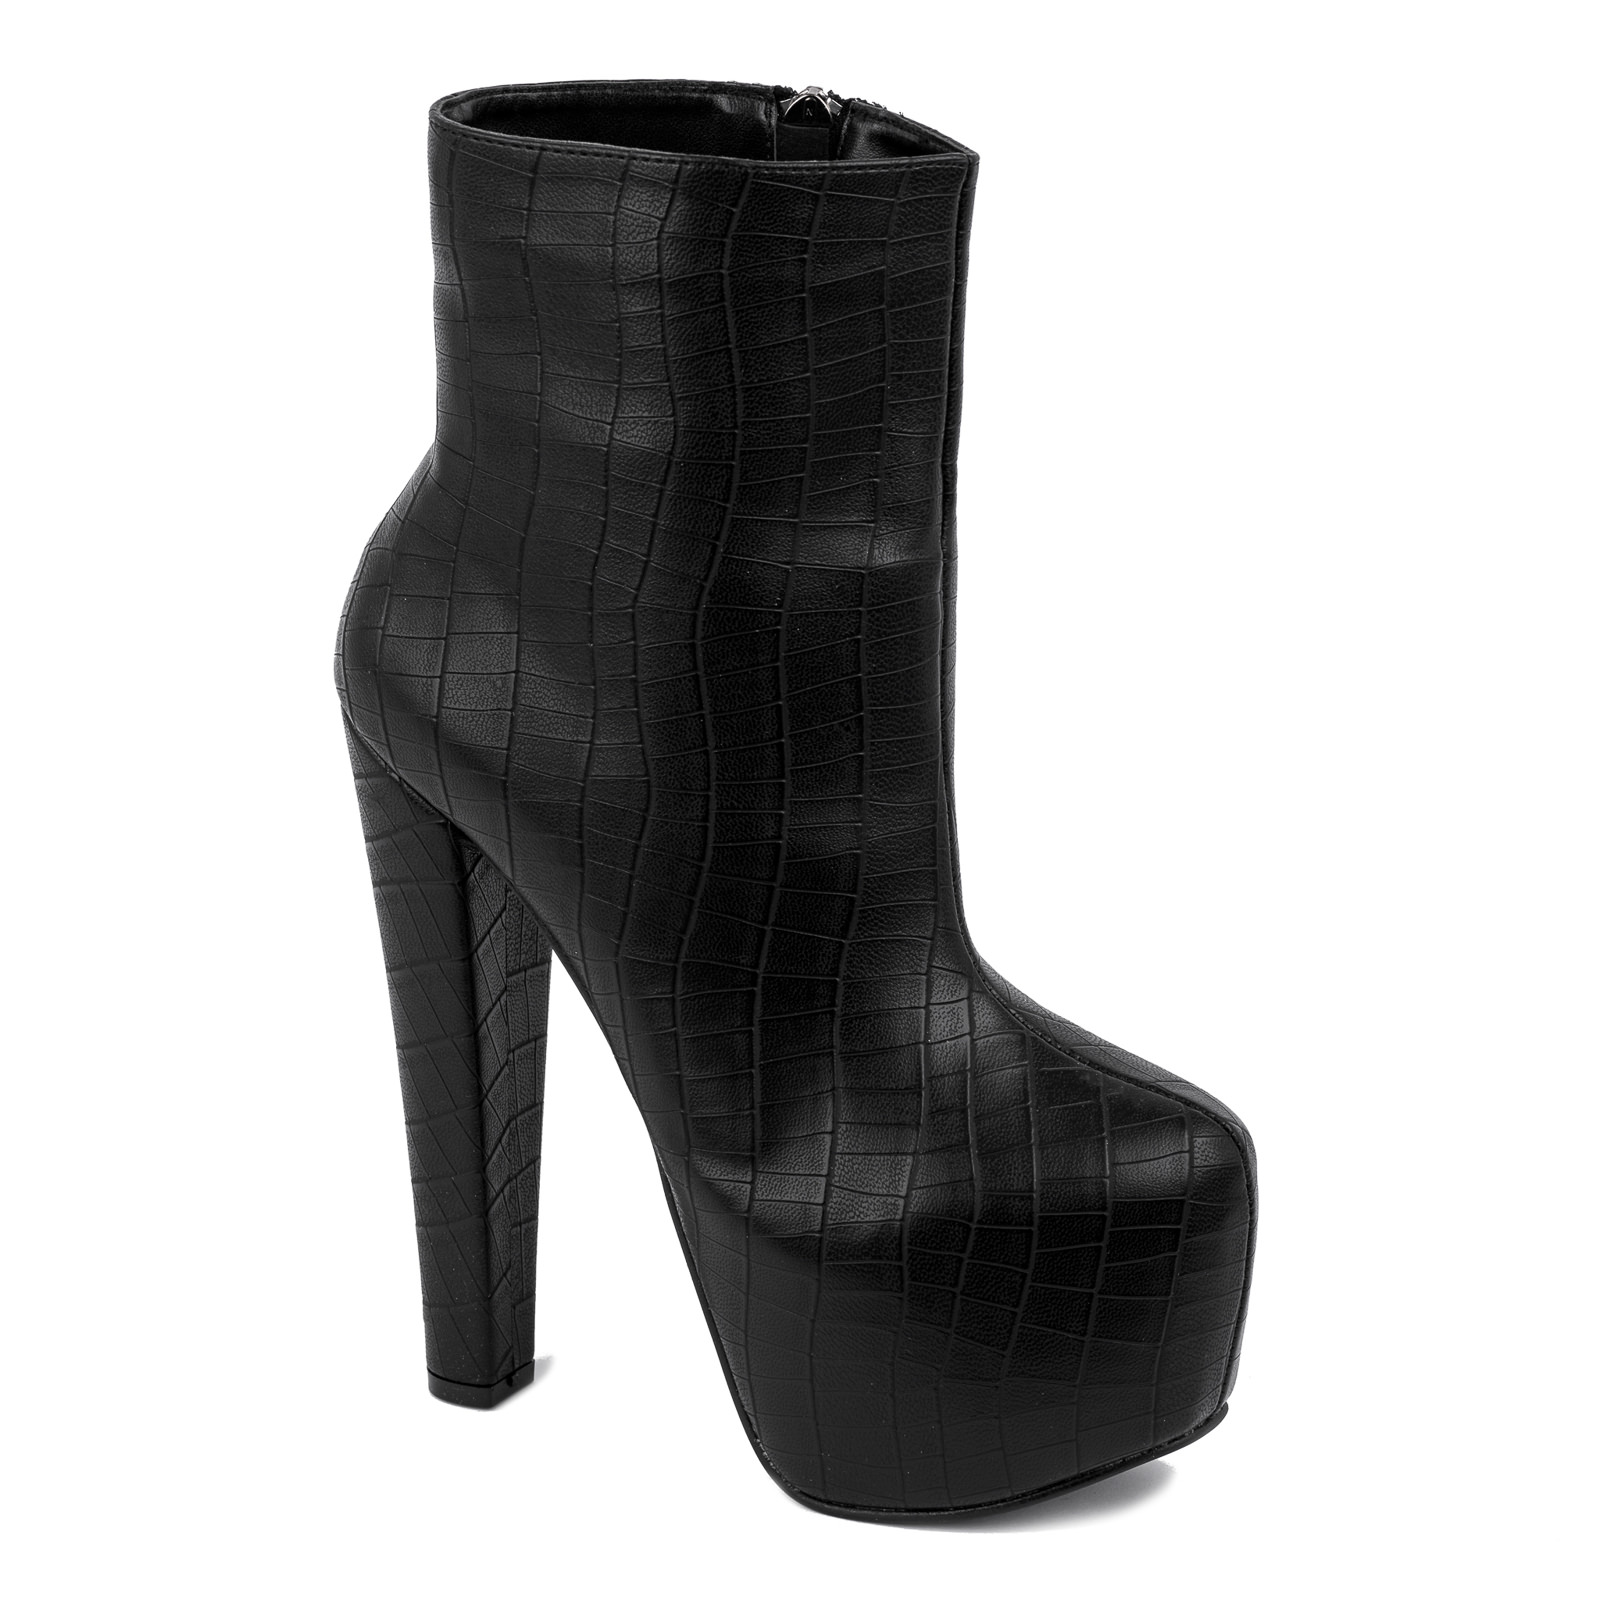 CROC PLATFORM ANKLE BOOTS WITH THICK HEEL - BLACK